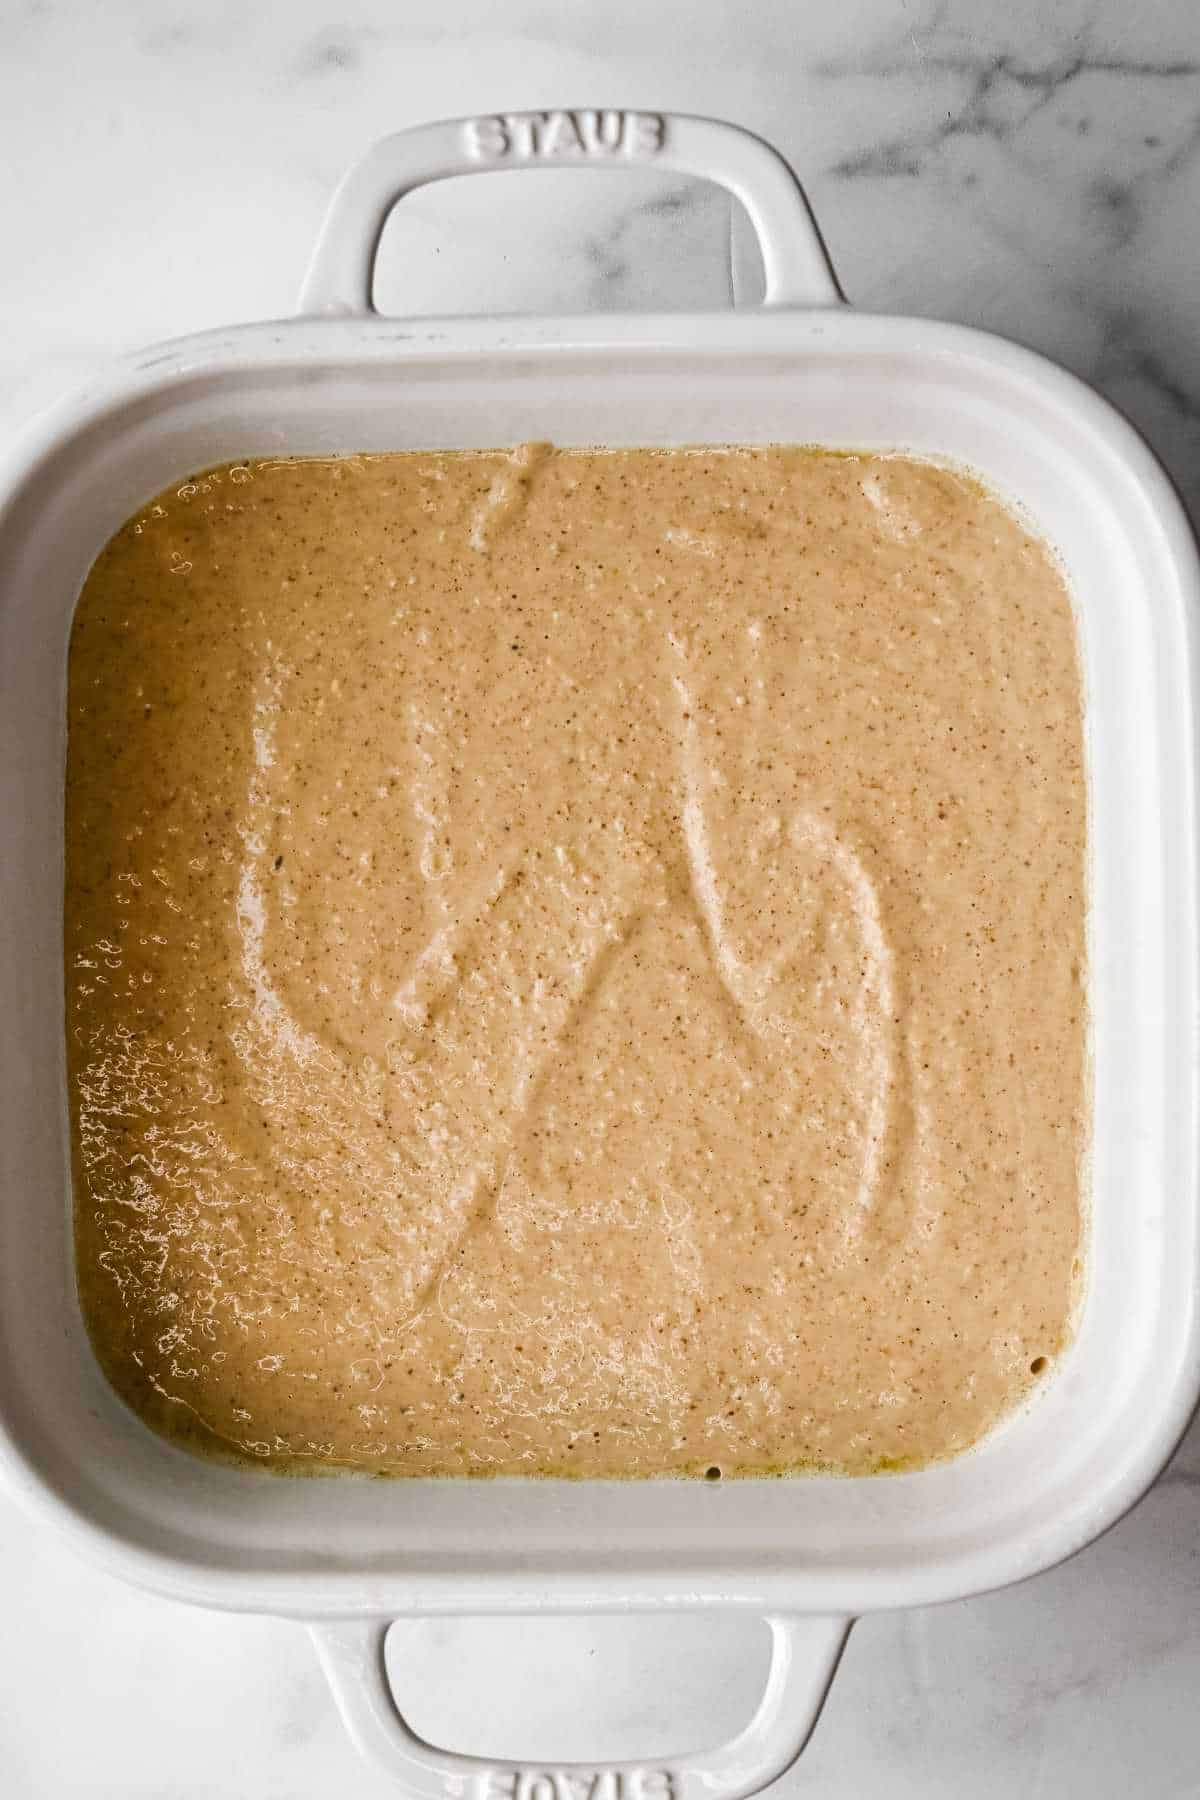 unbaked protein baked oatmeal batter in a white baking dish.